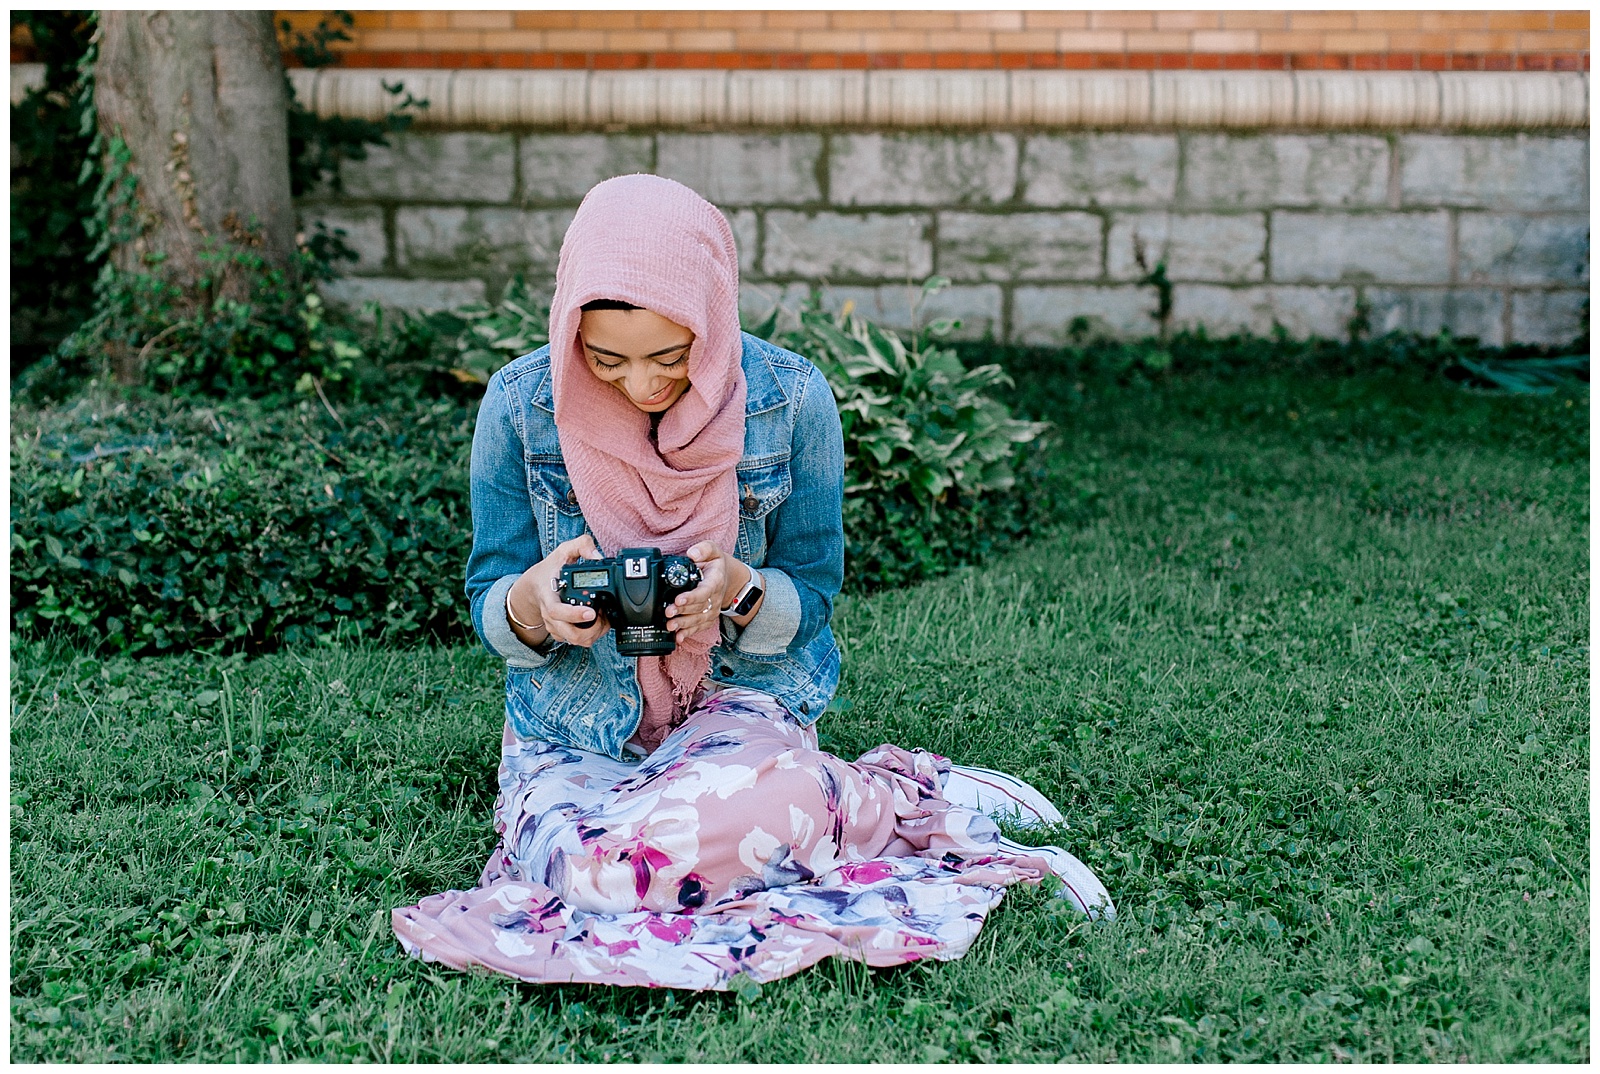 louisville ky photographer,muslim photographer,engagement photographer,what to expect,